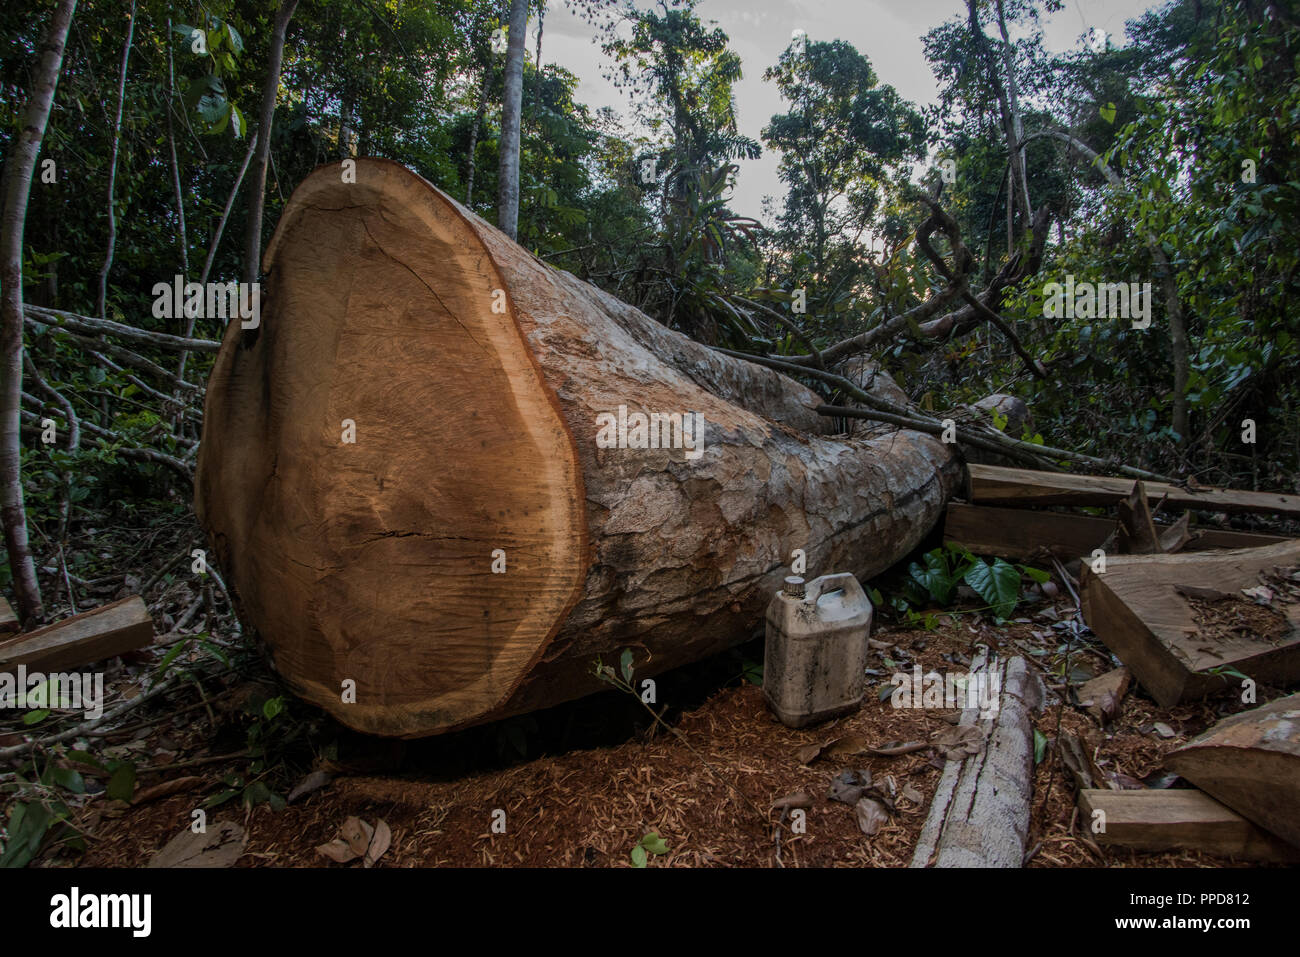 A logging site in Madre de Dios, Peru. Illegal logging is a huge threat to the Amazon rainforest.  Here a mature hardwood tree has been felled. Stock Photo